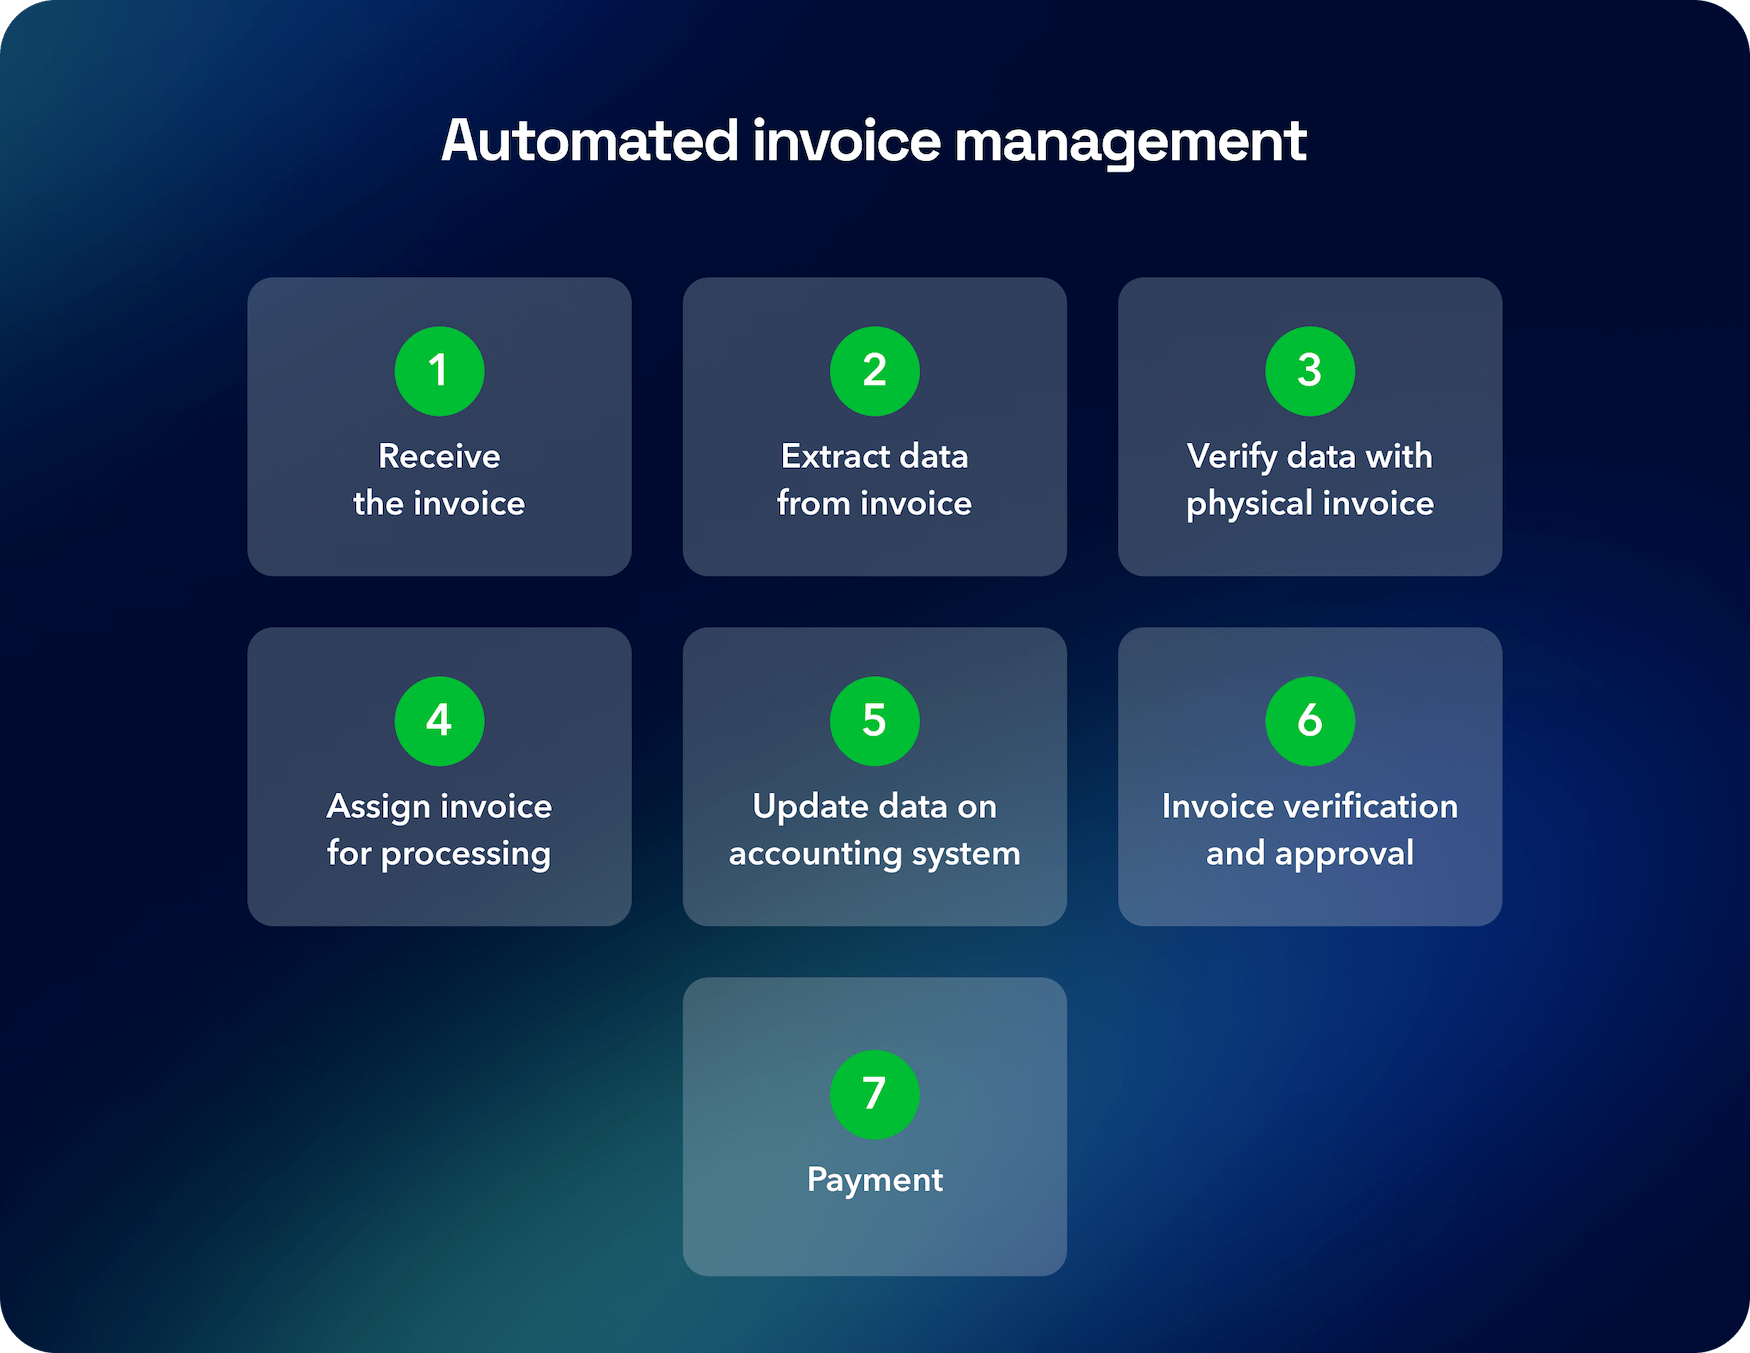 Automated invoice management: 1. receive invoice 2. extract data 3. verify data 4. assign invoice 5. upload data to automation 6. verify 7. payment